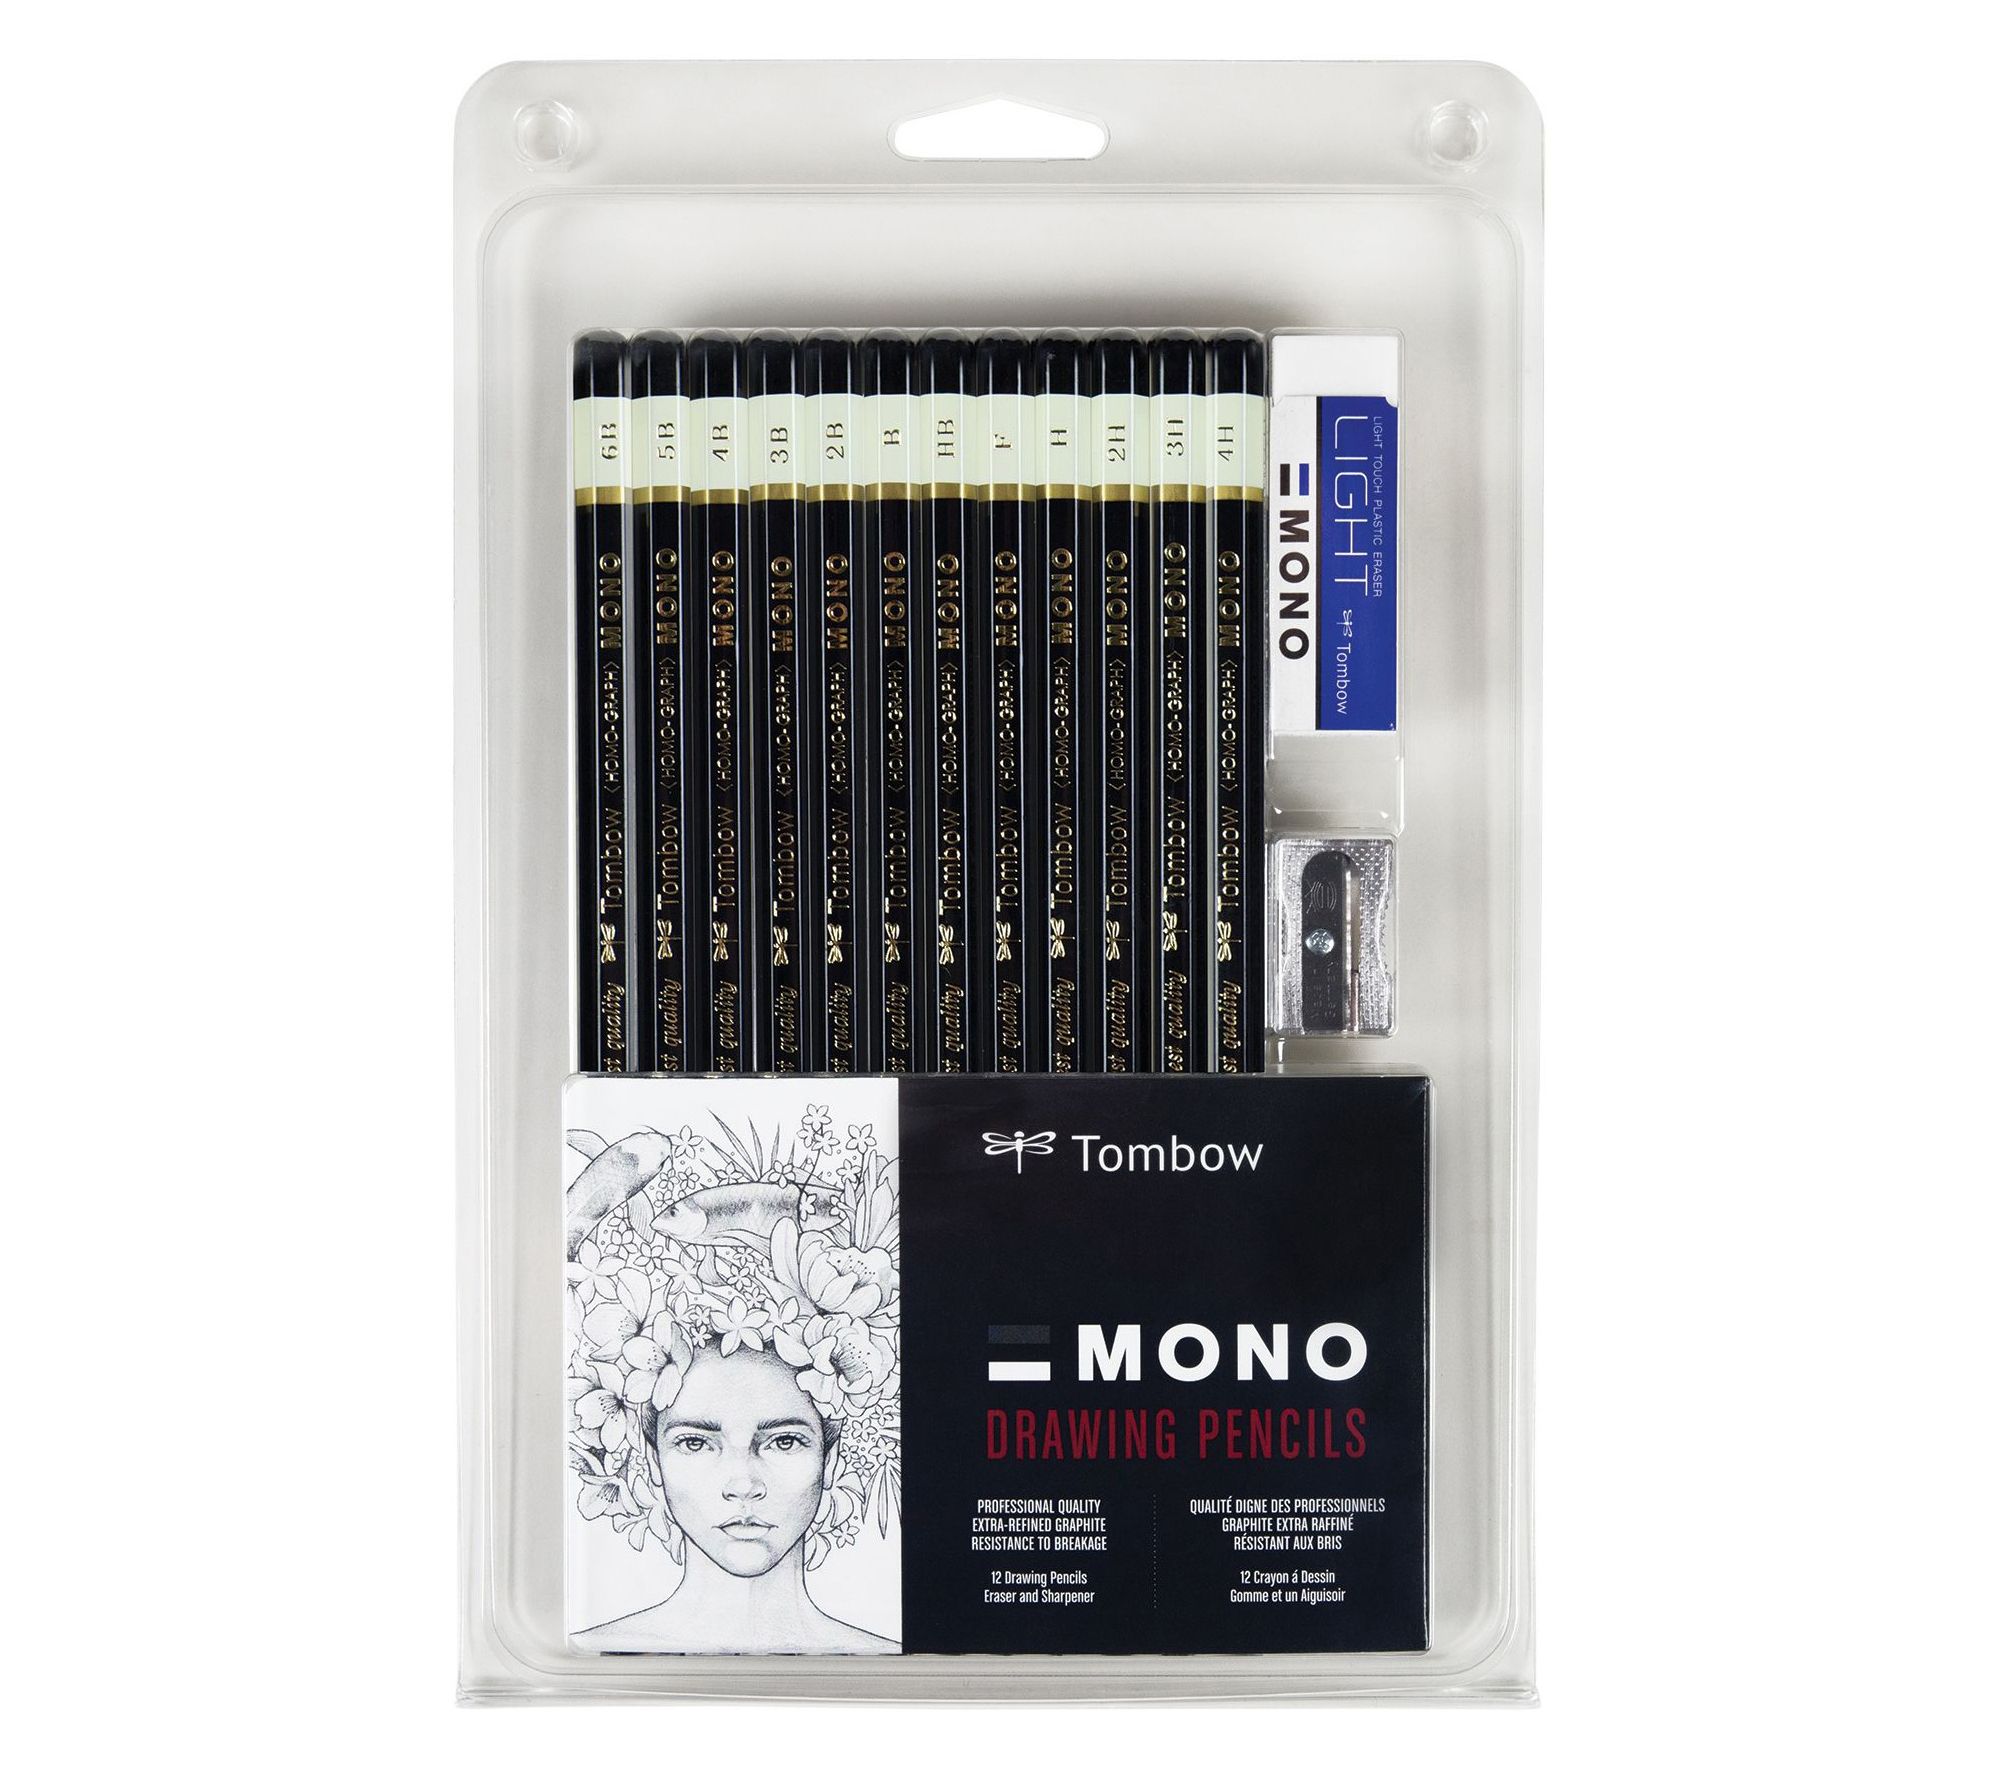 REVIEW Tombow Mono 4B graphite pencil - World's Best Pencil search 